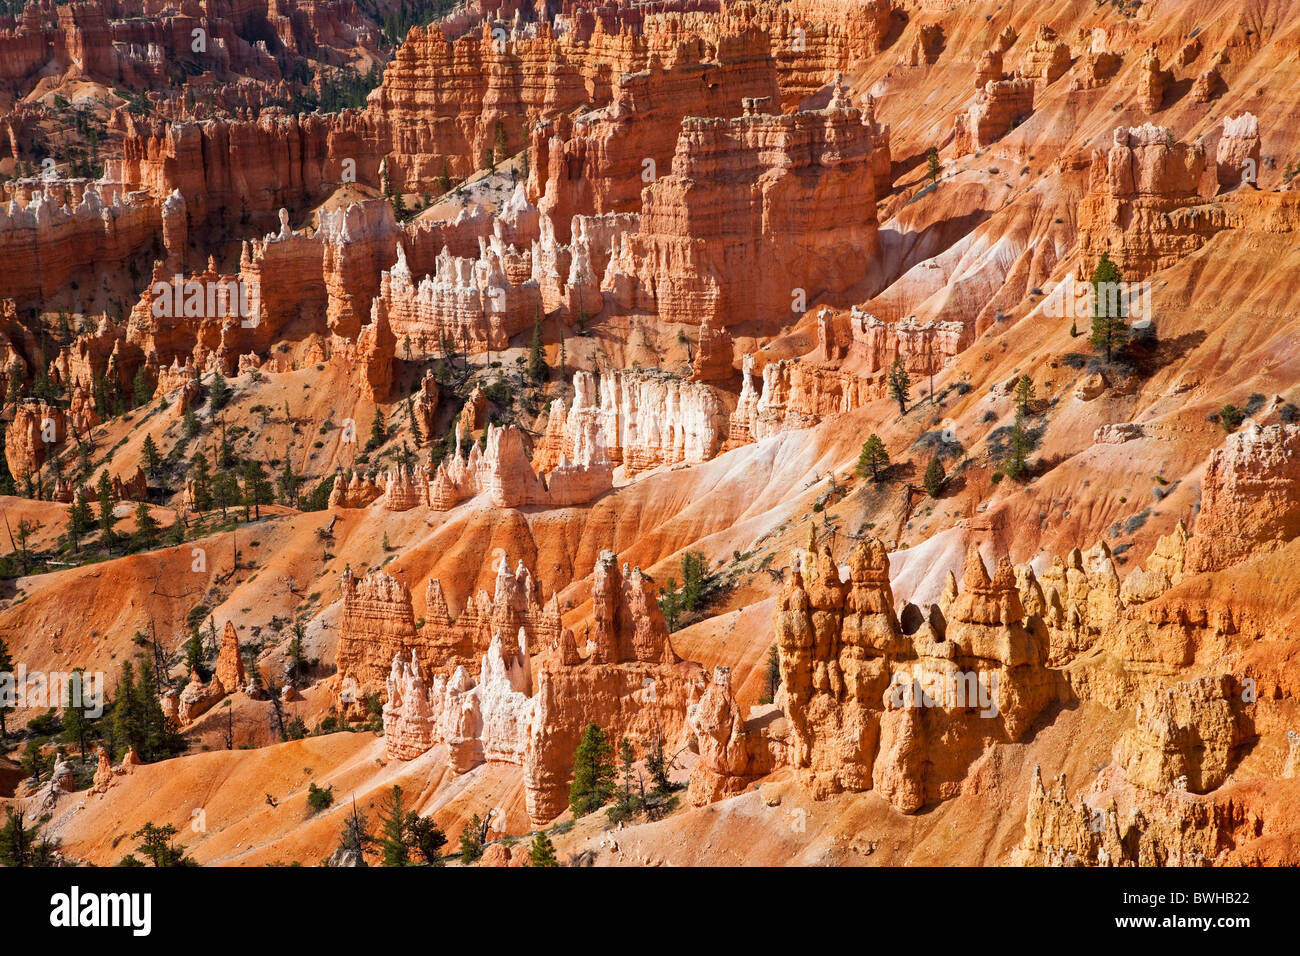 Rocky landscape with hoodoos, Bryce Canyon National Park, Utah, USA Stock Photo